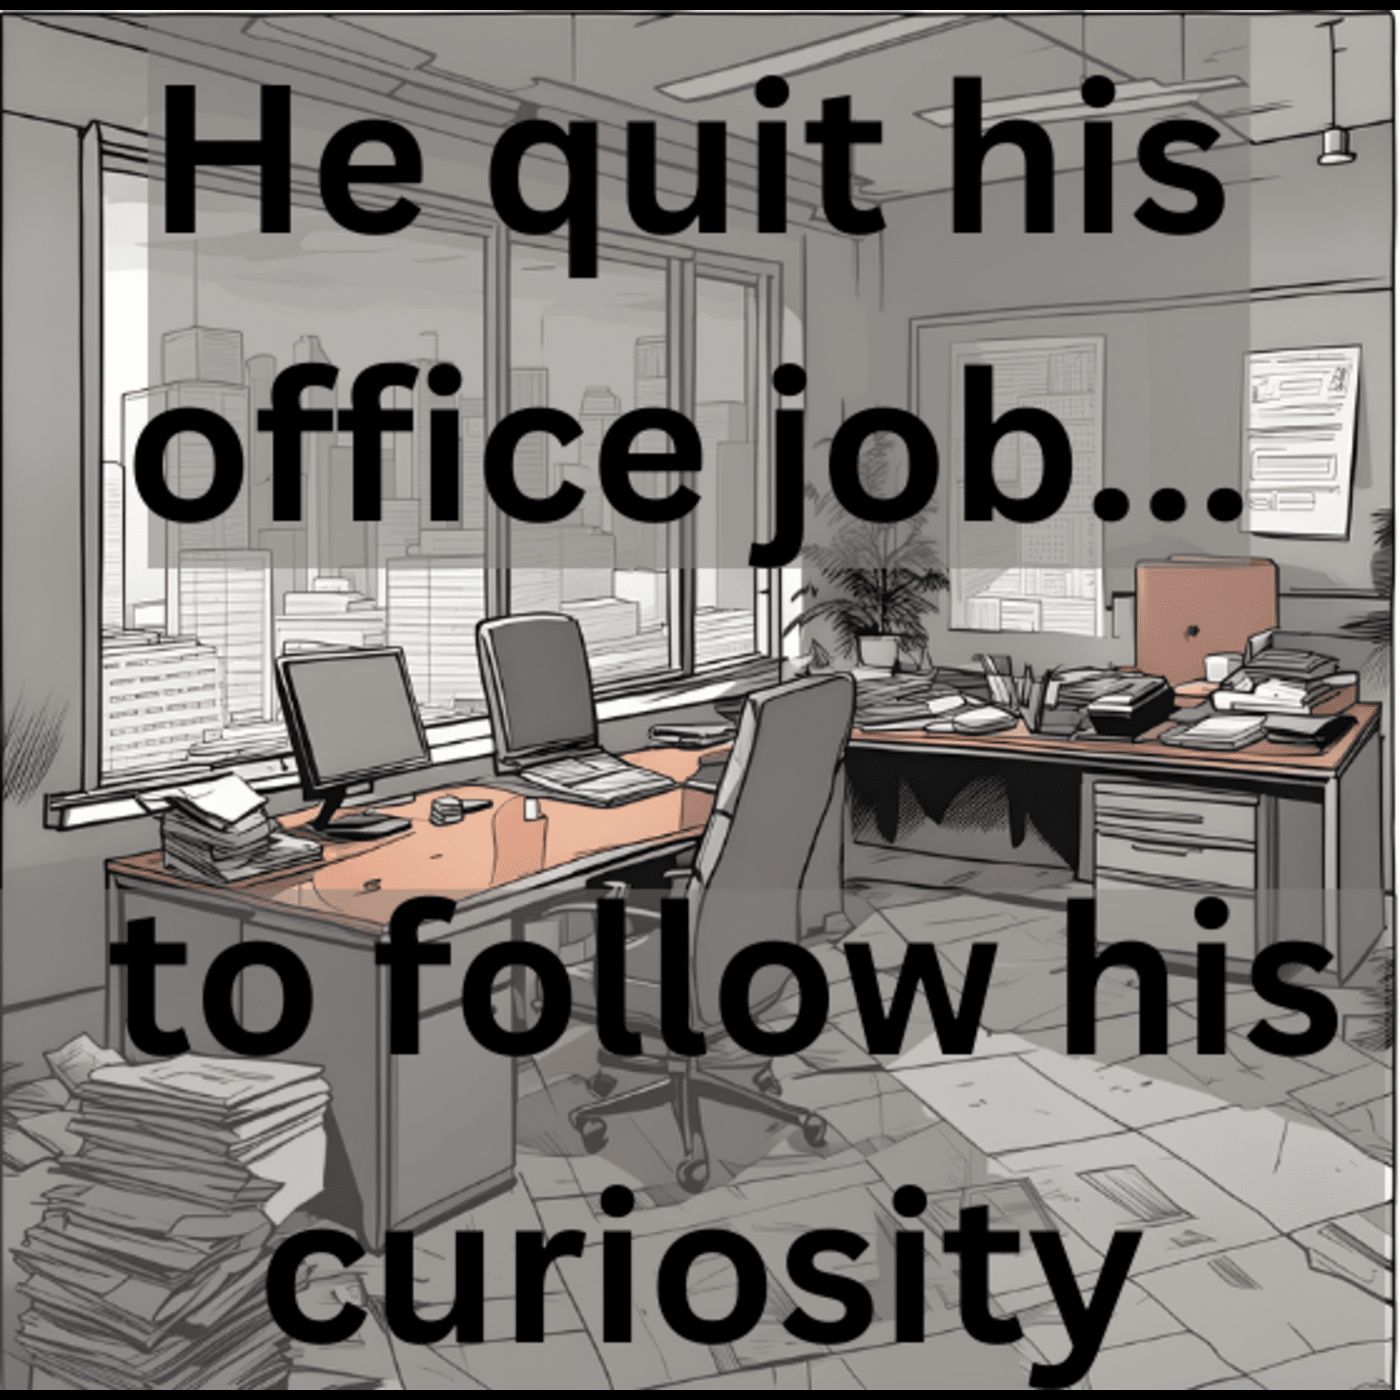 He quit his office job to follow his curiosity